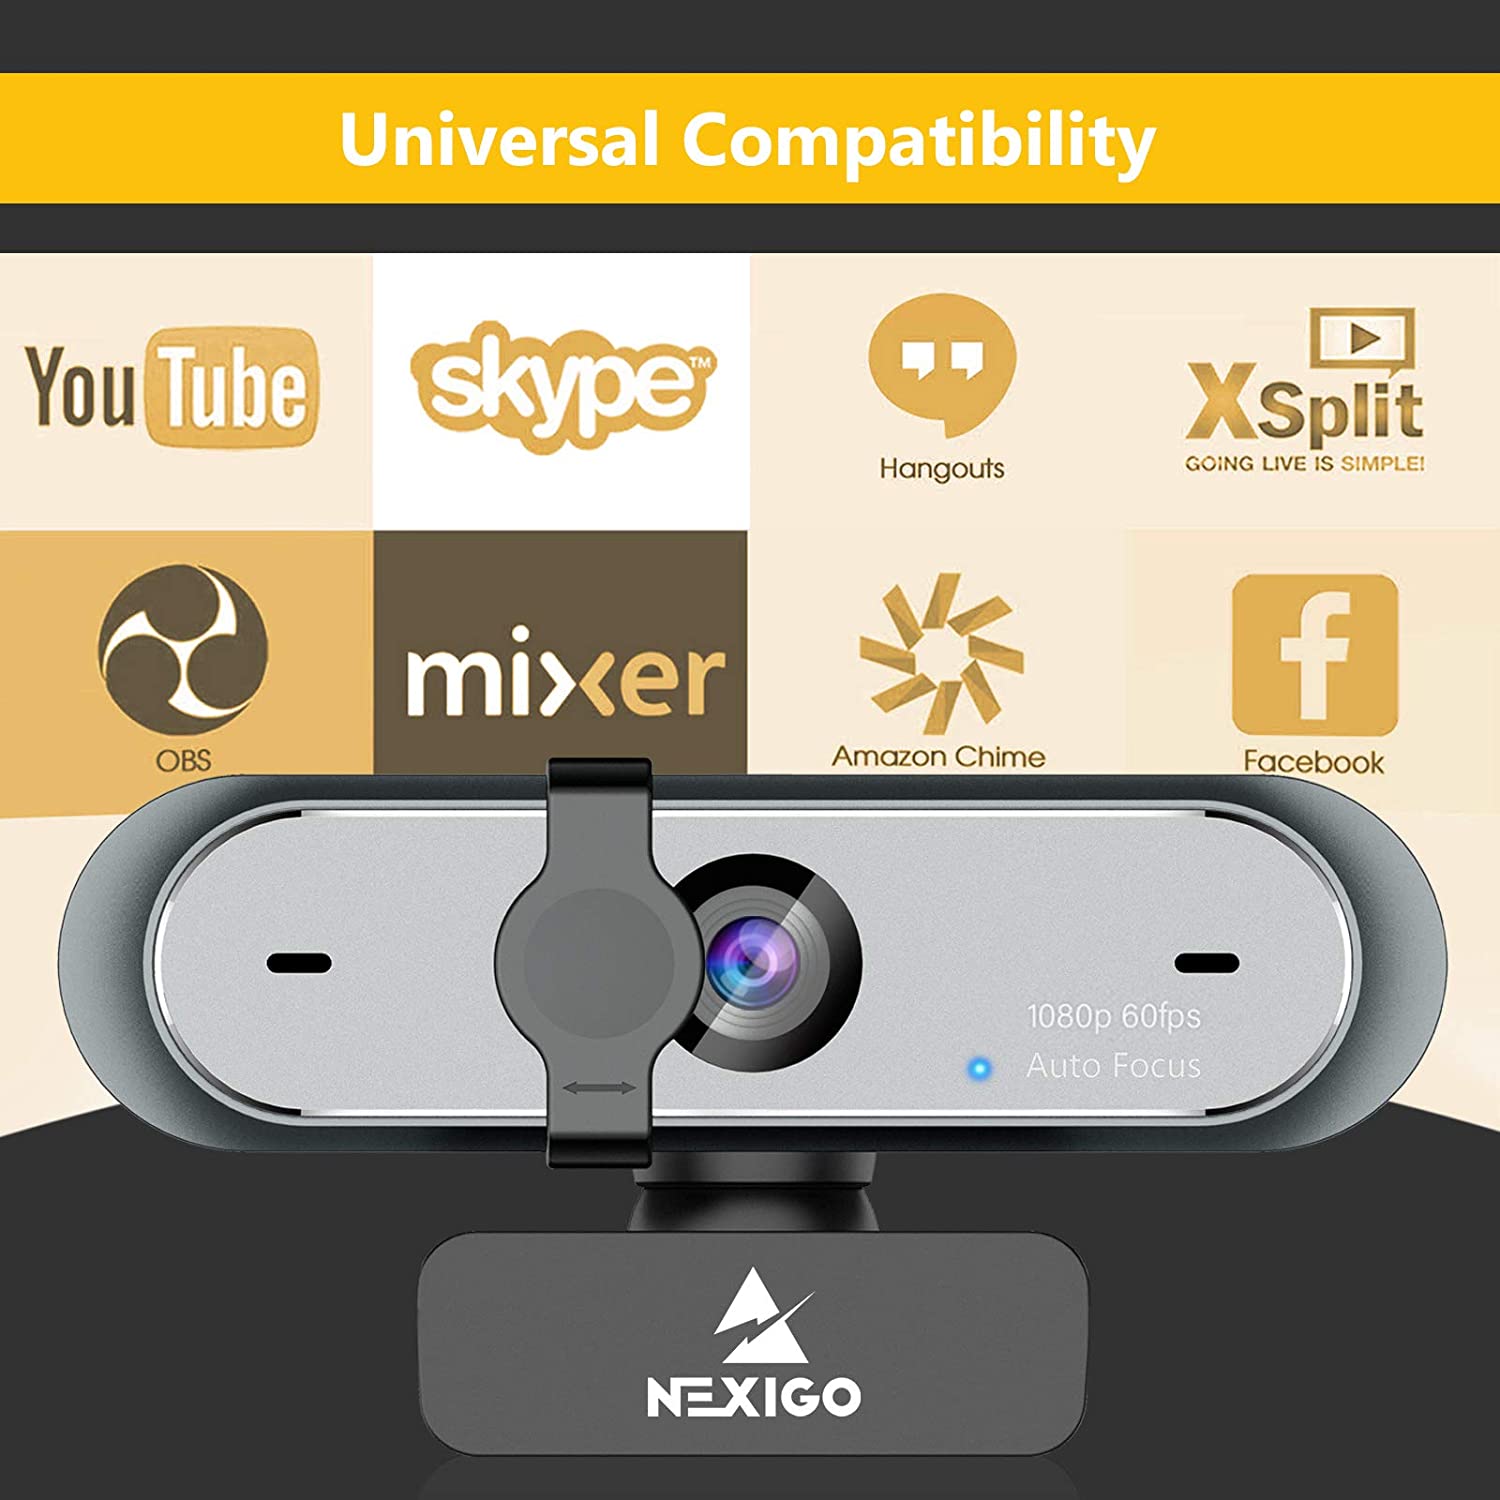 Webcam compatible with popular video software like Skype, YouTube, OBS, mixer, Facebook and more